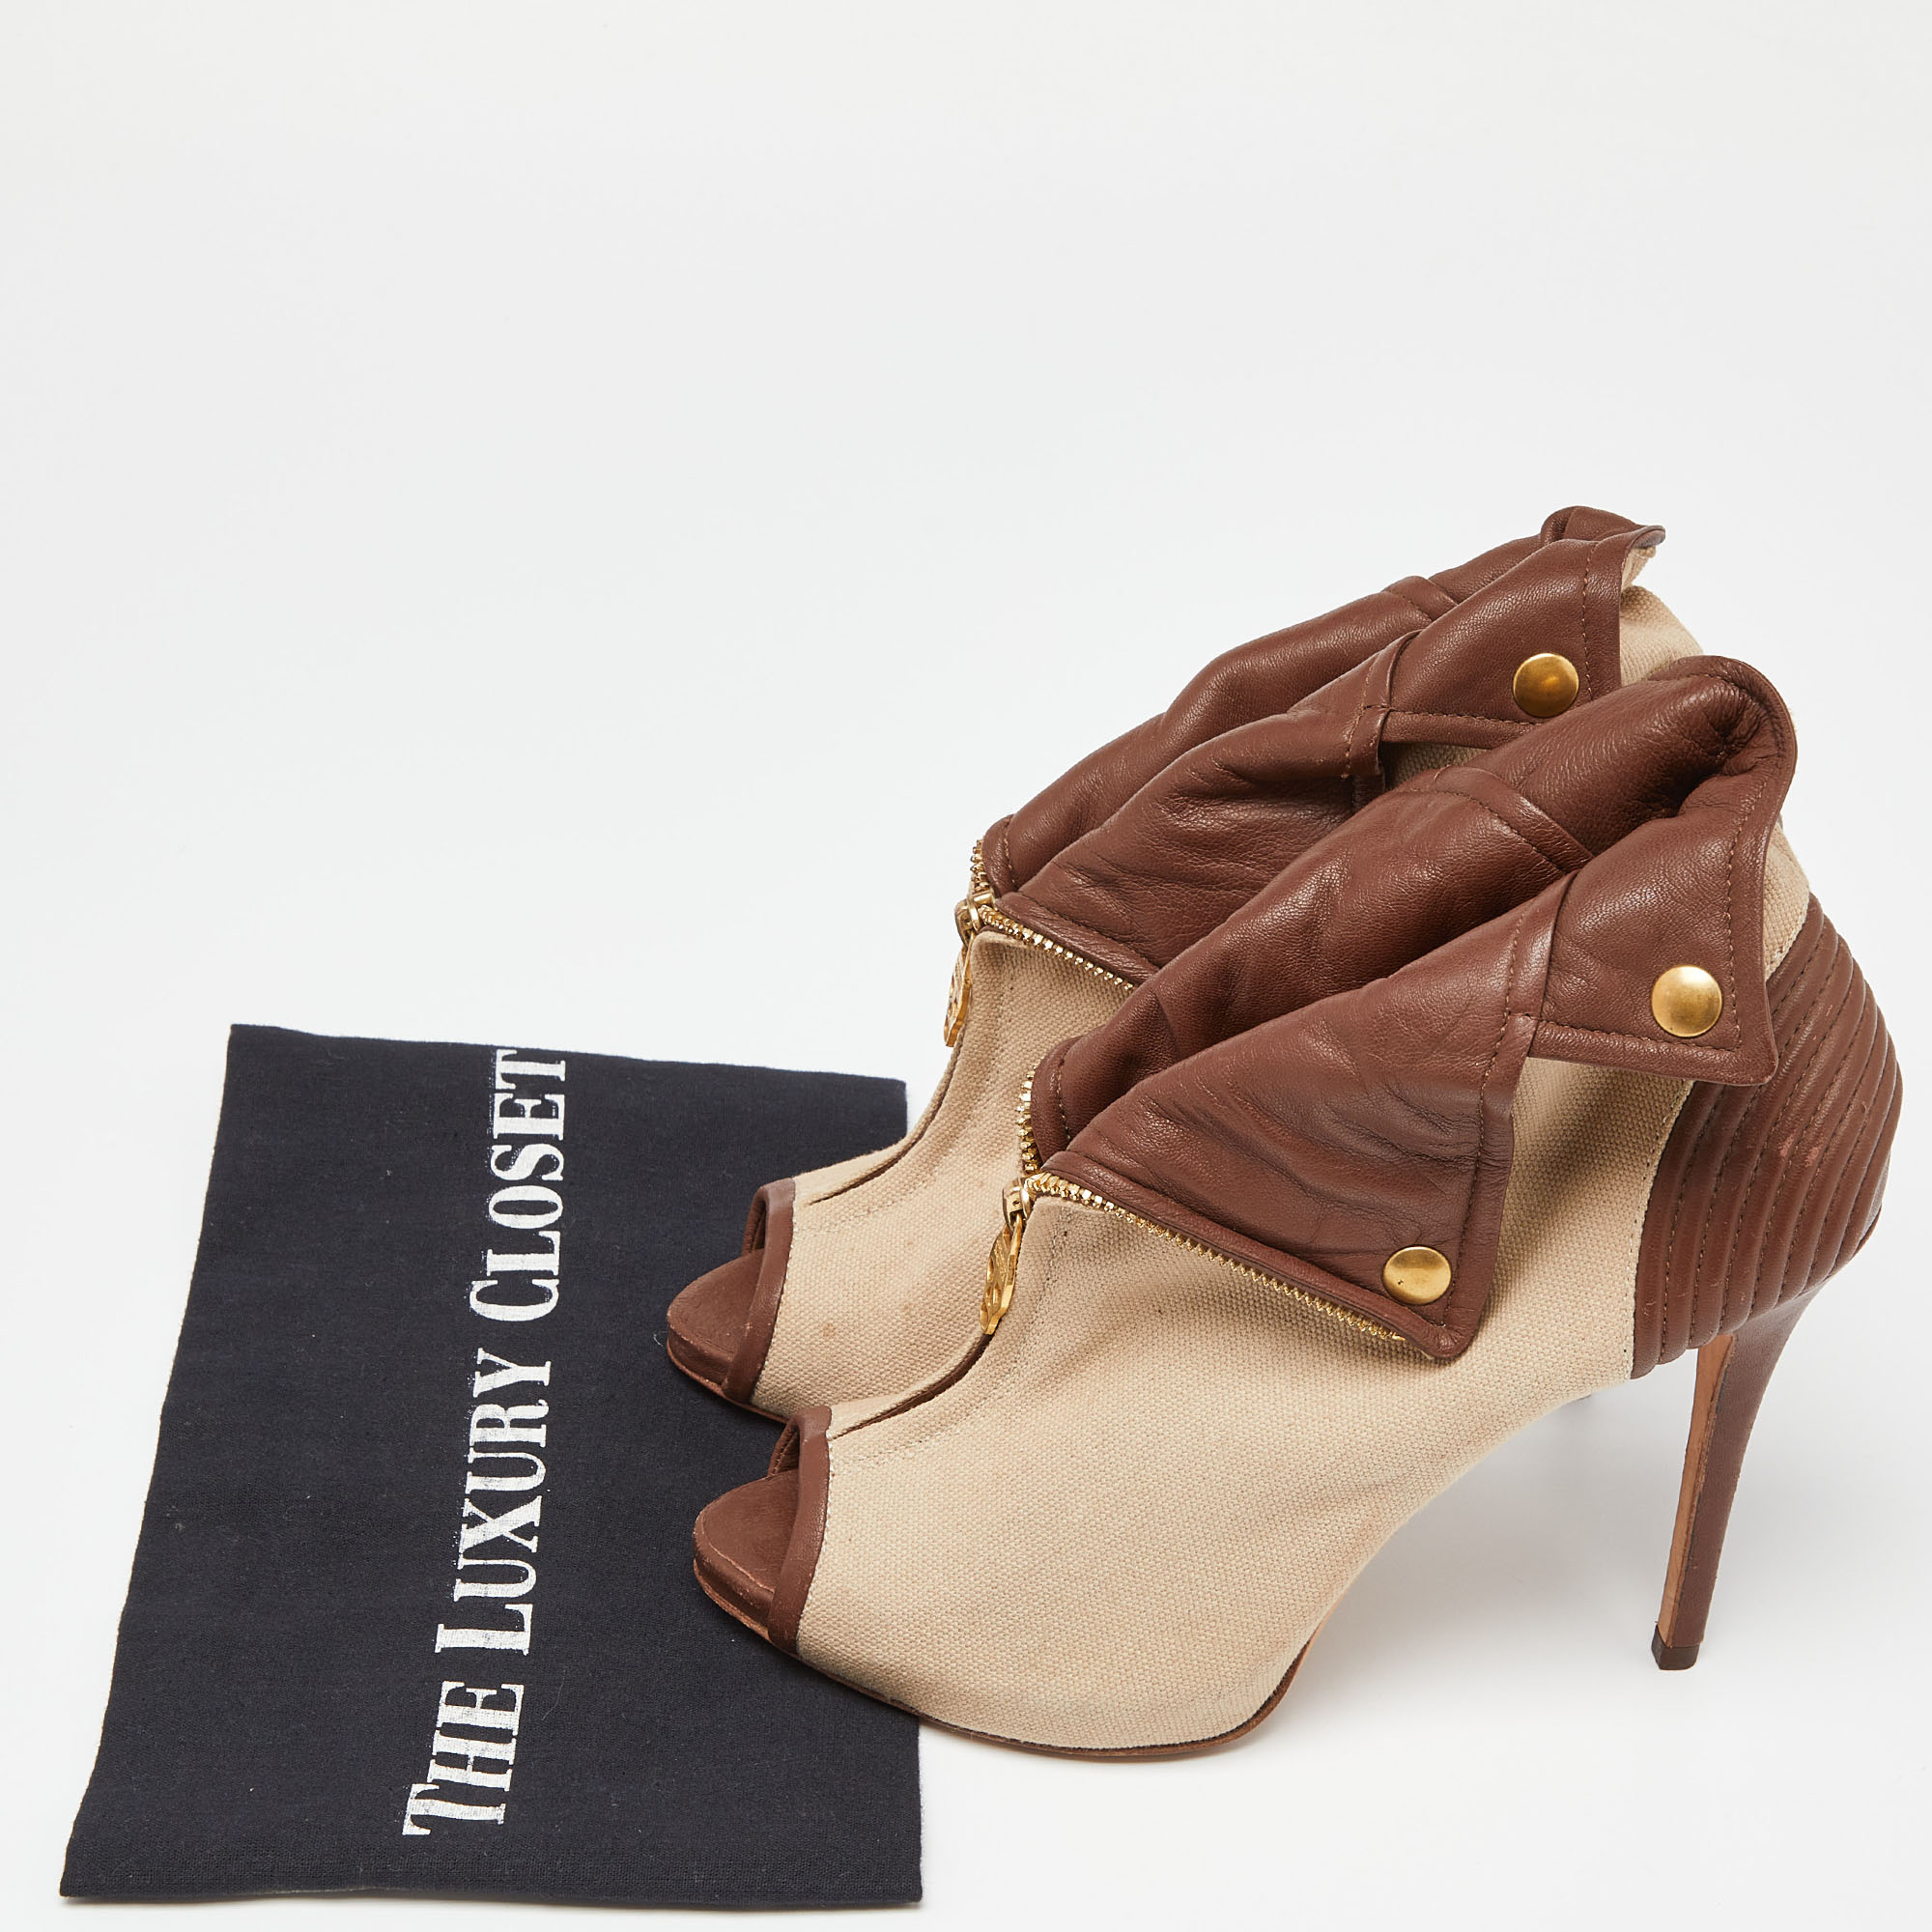 Alexander McQueen Beige/Brown Canvas And Leather Faithful Skull Peep Toe Platform Booties Size 38